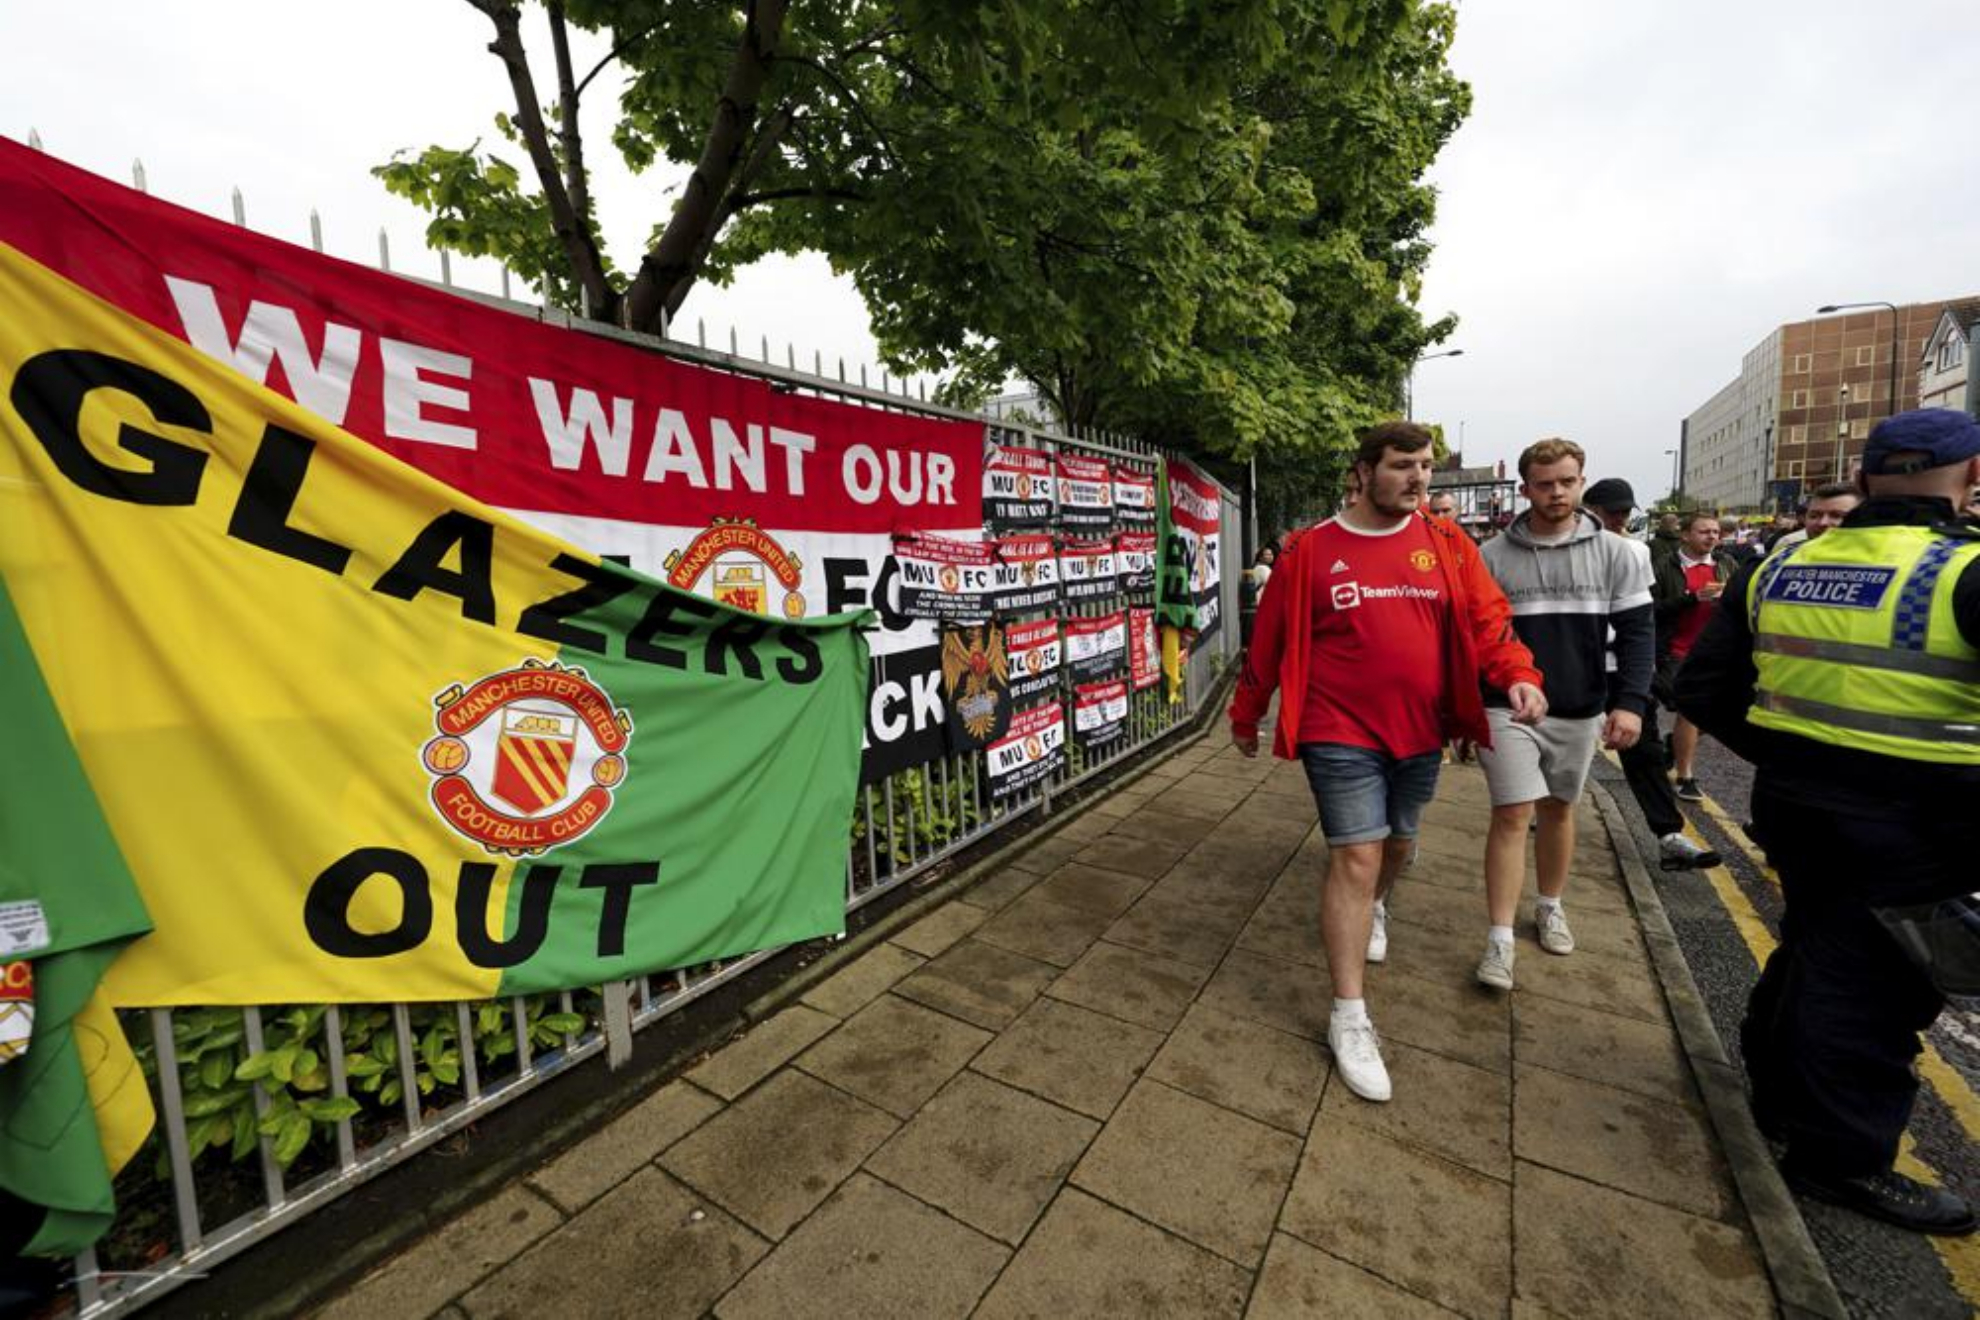 Fans walk to the Old Trafford ground ahead of an organised protest against the Manchester United owners.